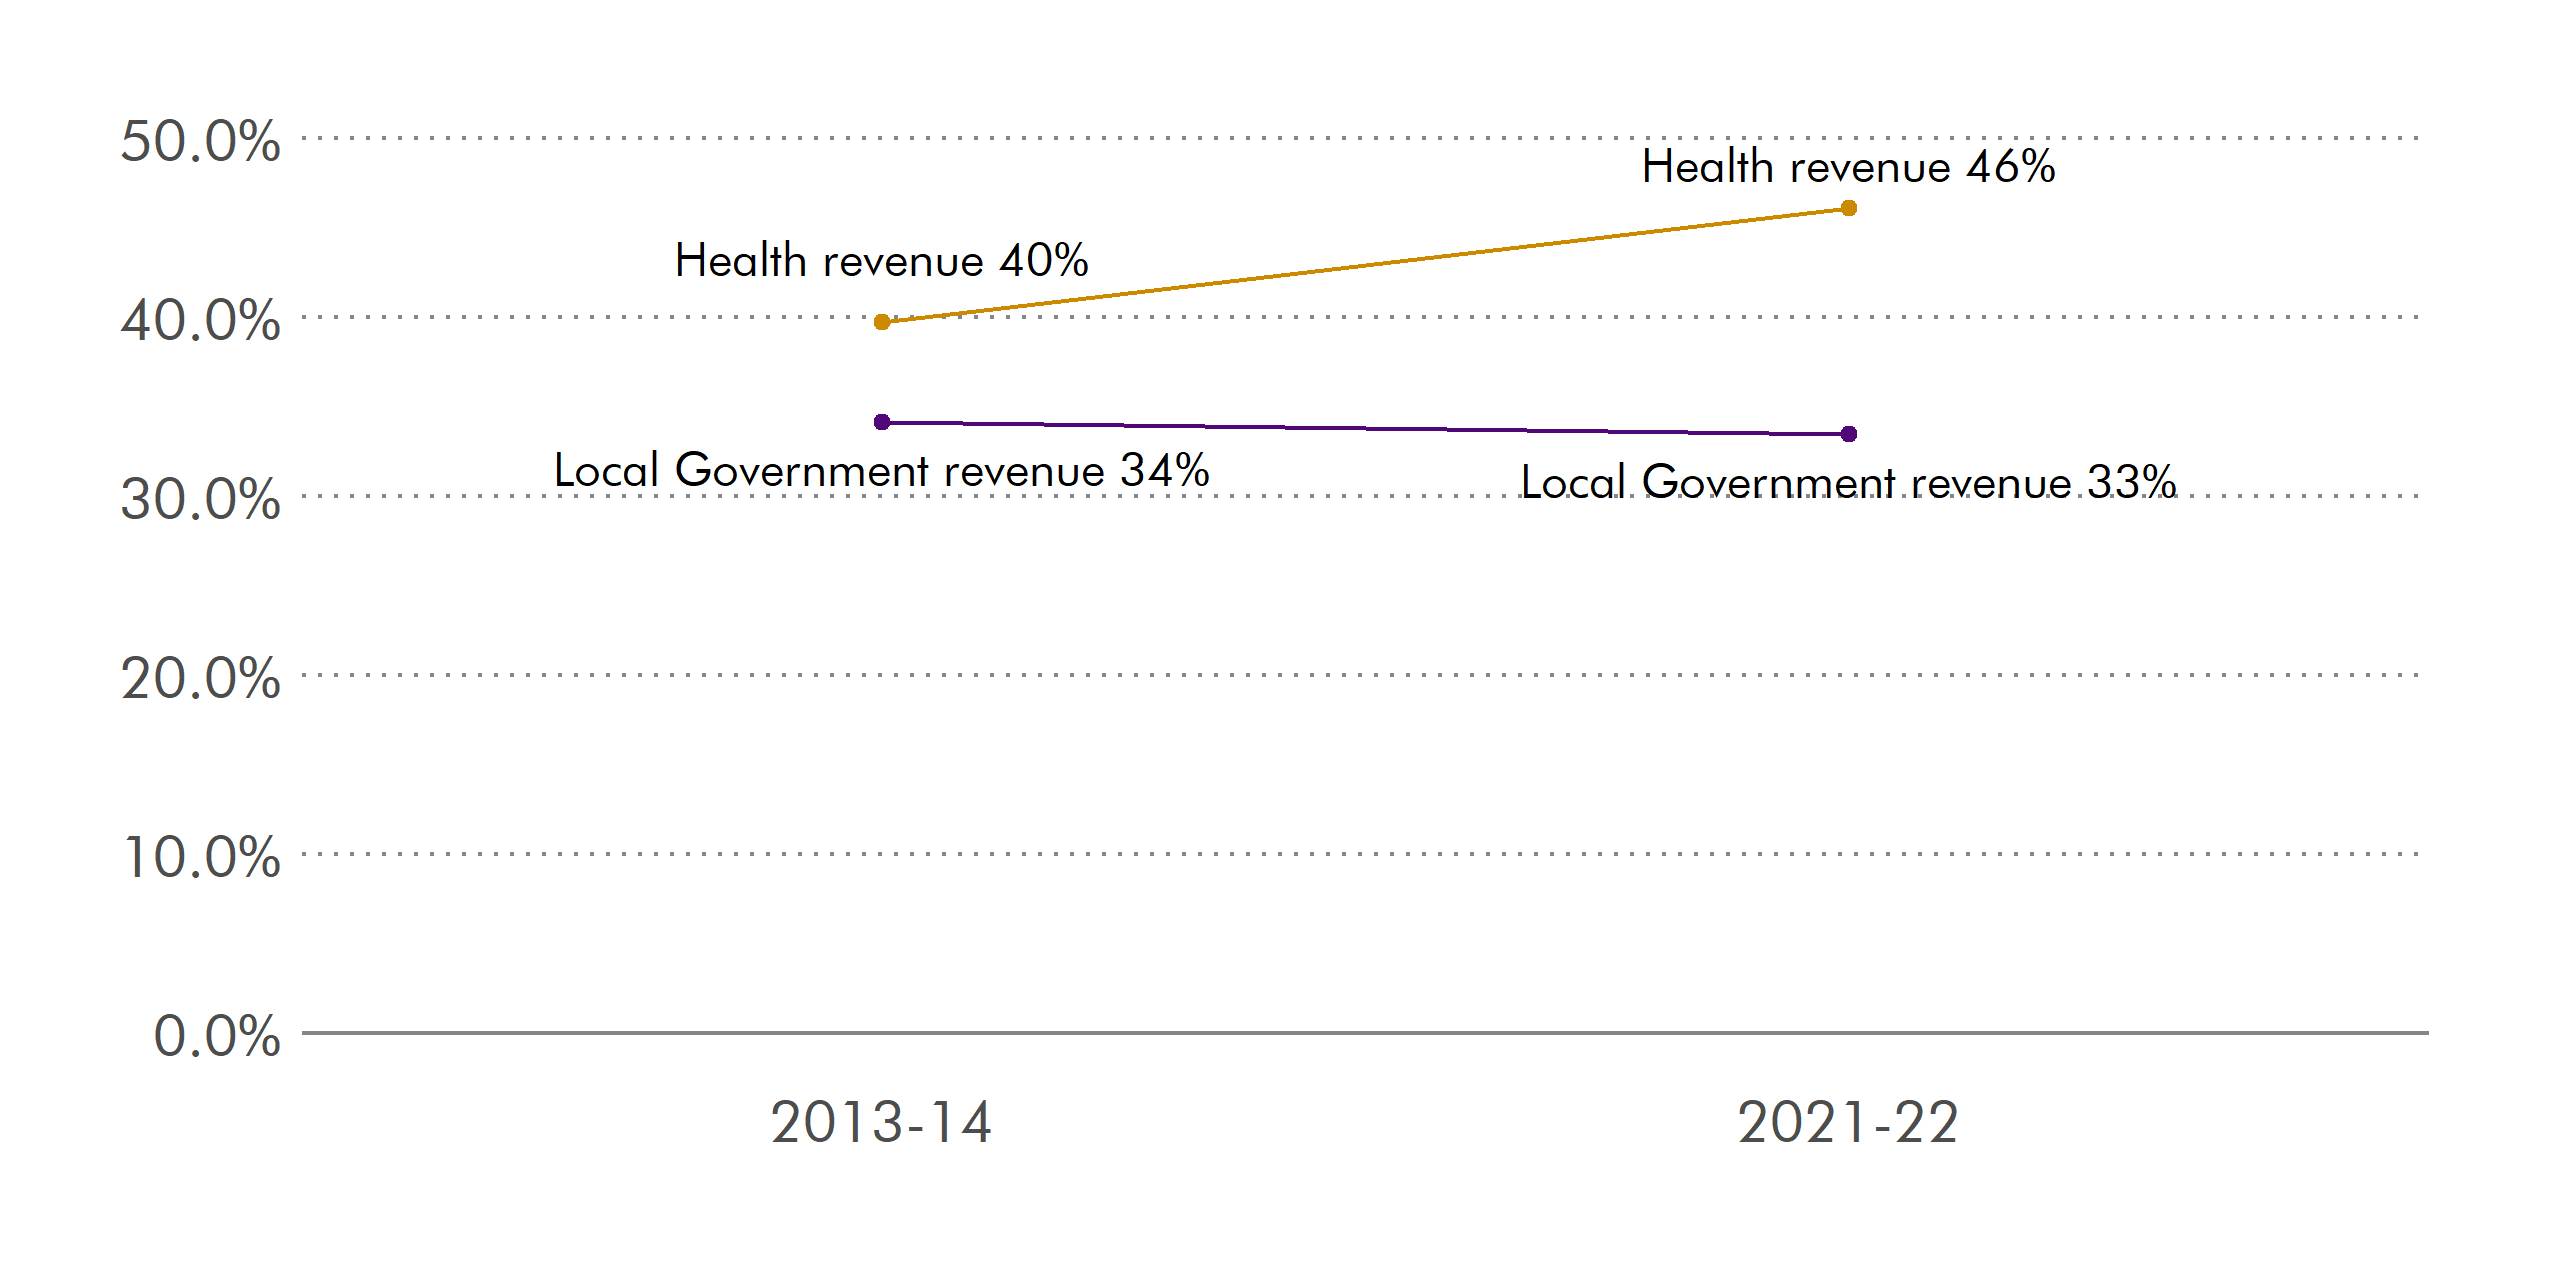 Figure 6 shows health and local government spending as a percentage of Scottish Government resource budget in 2013-14 and 2021-22. For health it grows from 40% to 46%. For local government it falls from 34% to 33%.